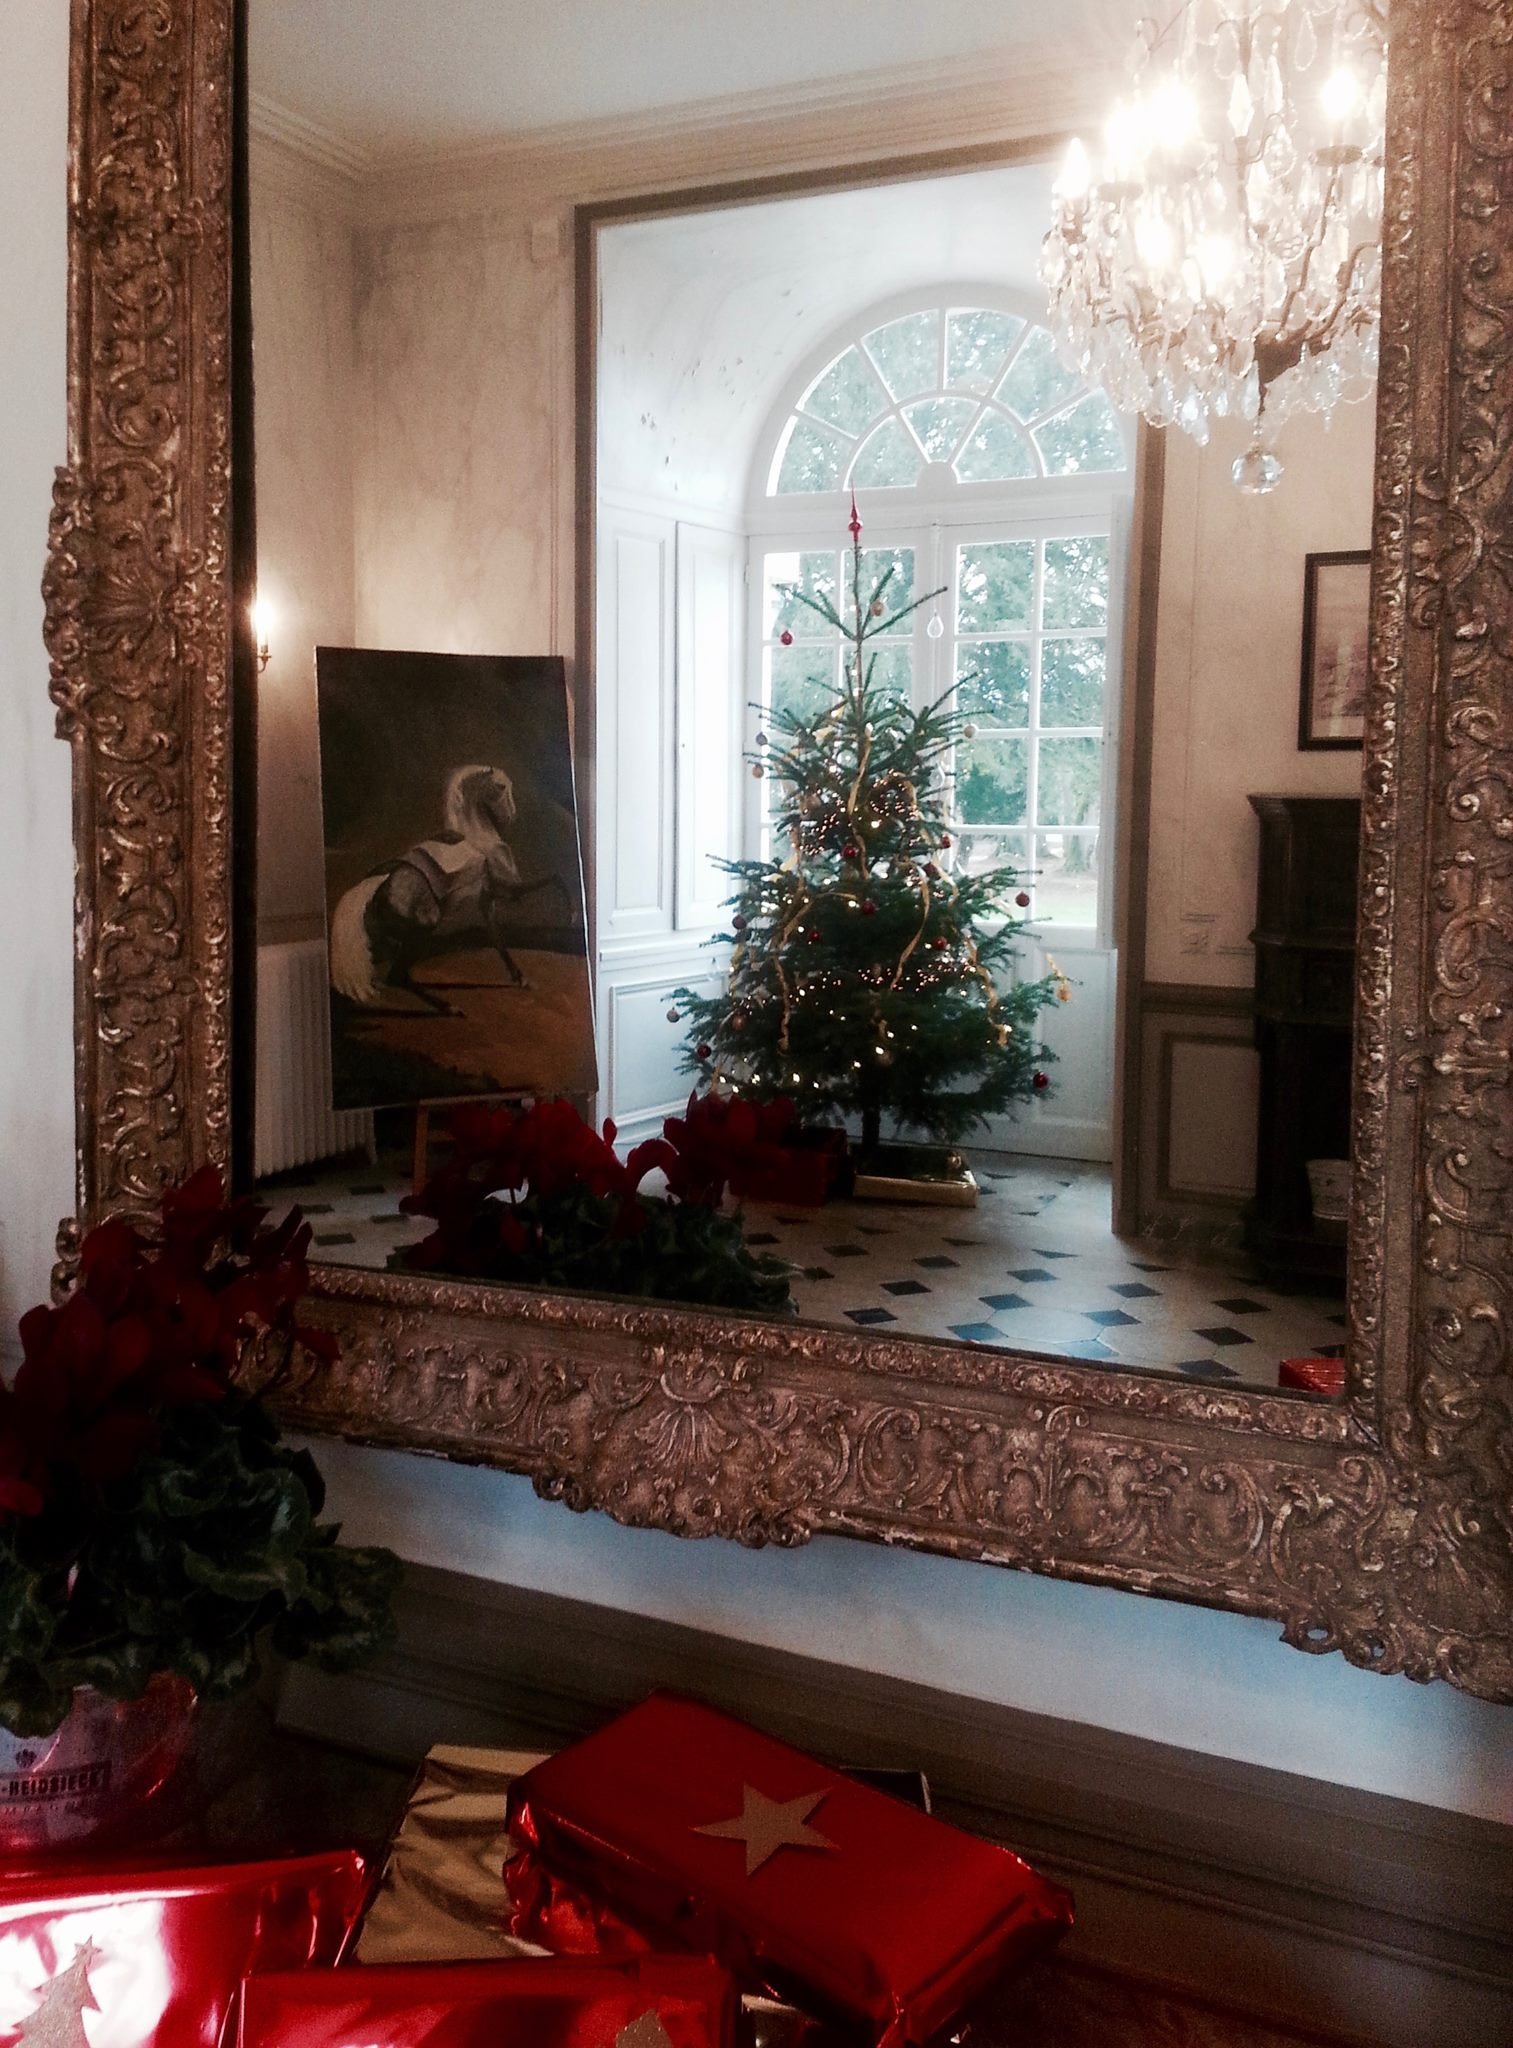 An ornate mirror showing the reflection of a chandelier and a decorated Christmas tree at the Chateau in the holidays.